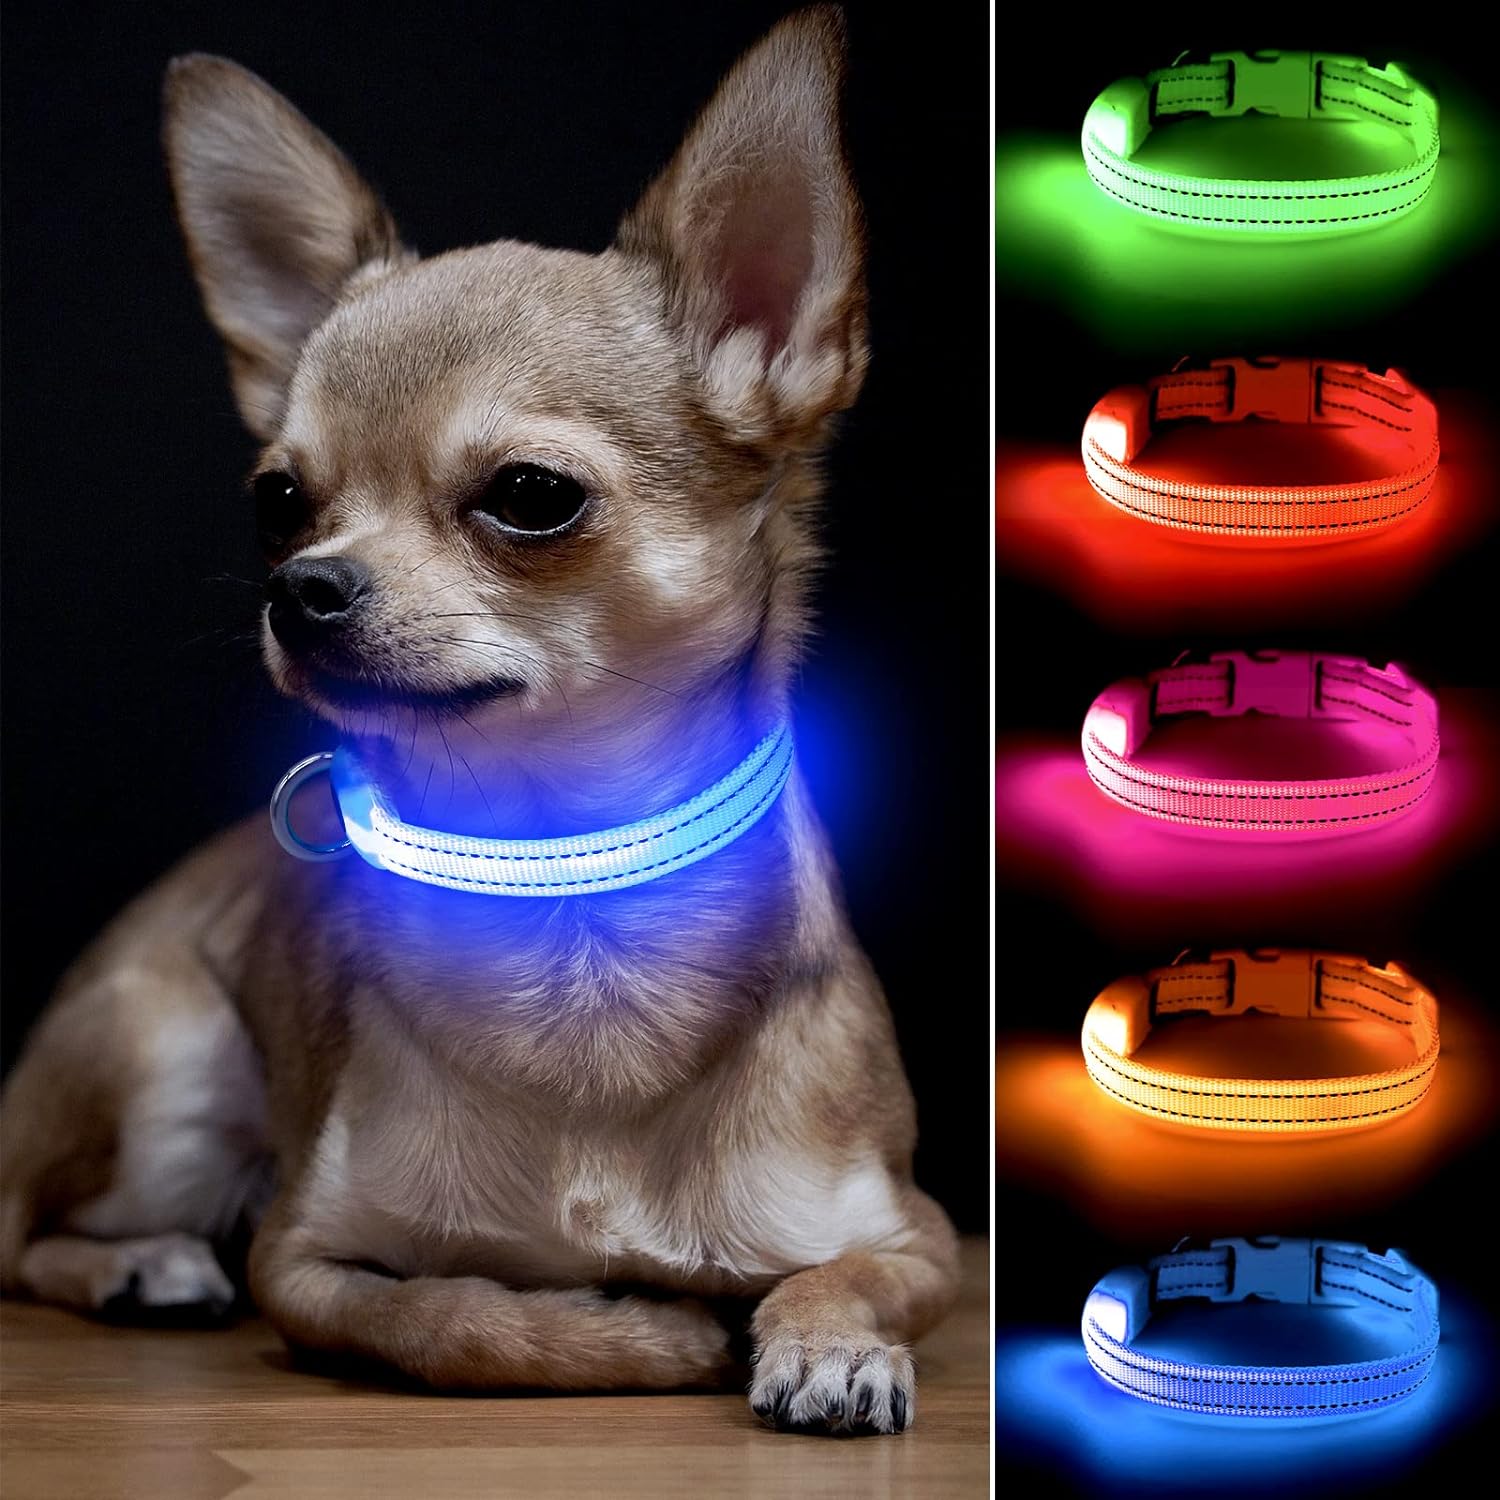 SOHOBLOO'S Led Pet Collar (Buy 1 Get 2 Free TODAY!)